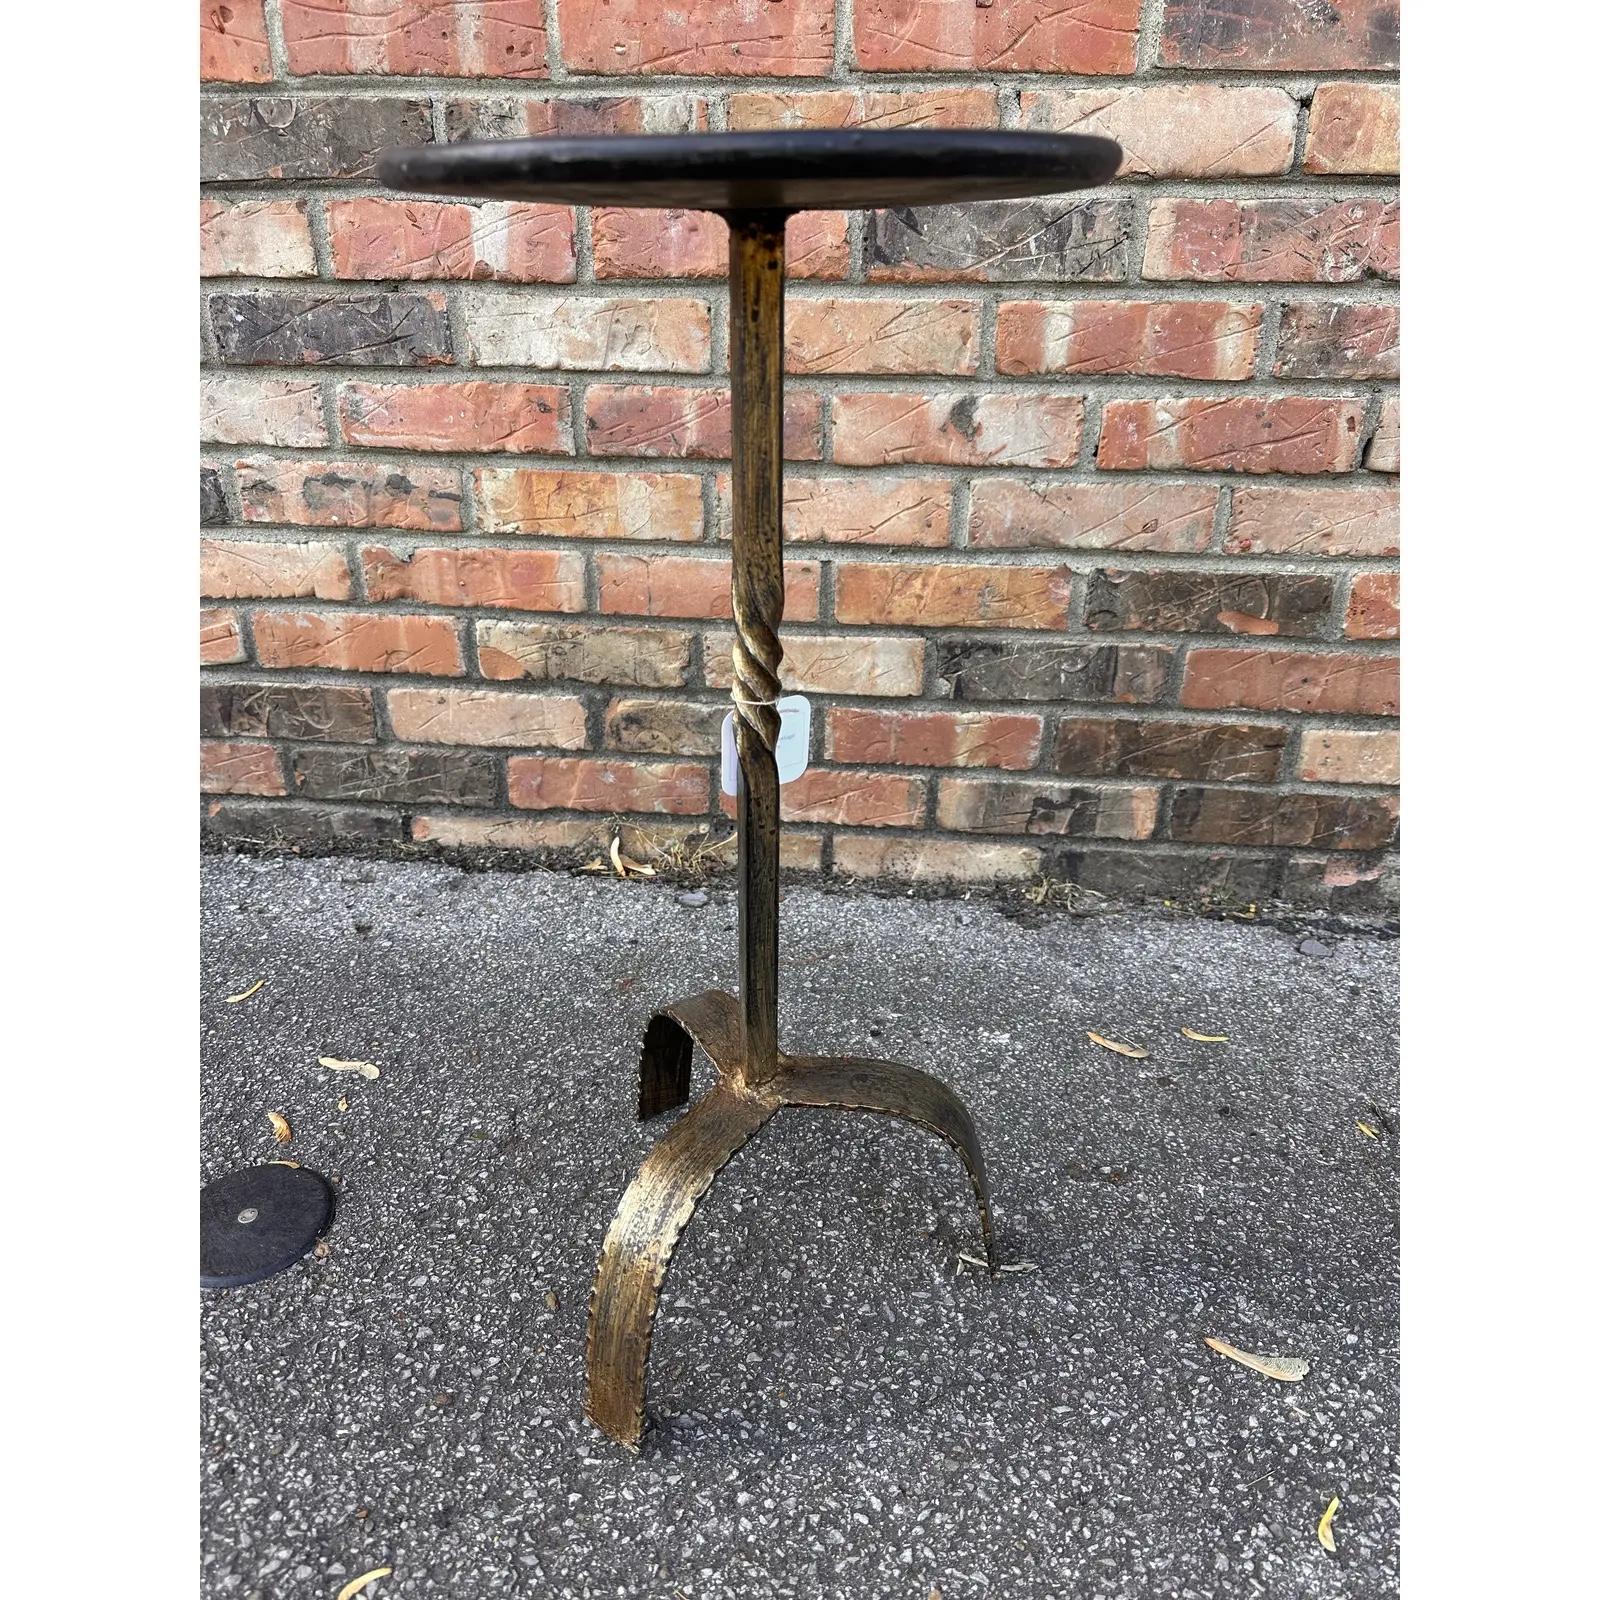 This is wonderful little Spanish made wrought iron drink table with an antiqued gold finish.Contemporary yet antique inspired style for any decor aesthetic. We have Several of these listed all have their own unique design, giving them such wonderful